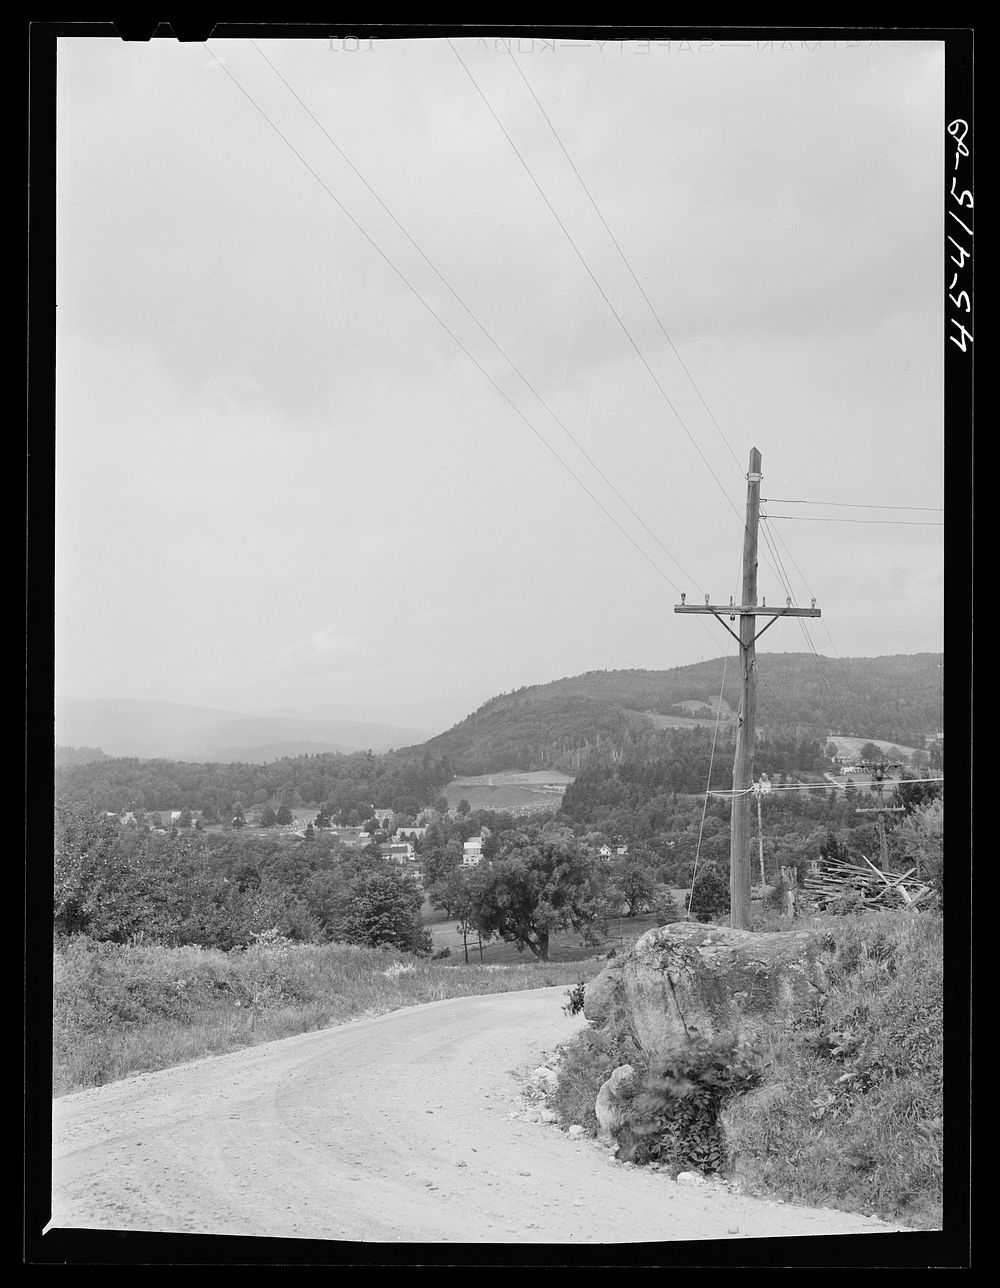 [Untitled photo, possibly related to: A rain coming over the town of Ludlow, Vermont]. Sourced from the Library of Congress.